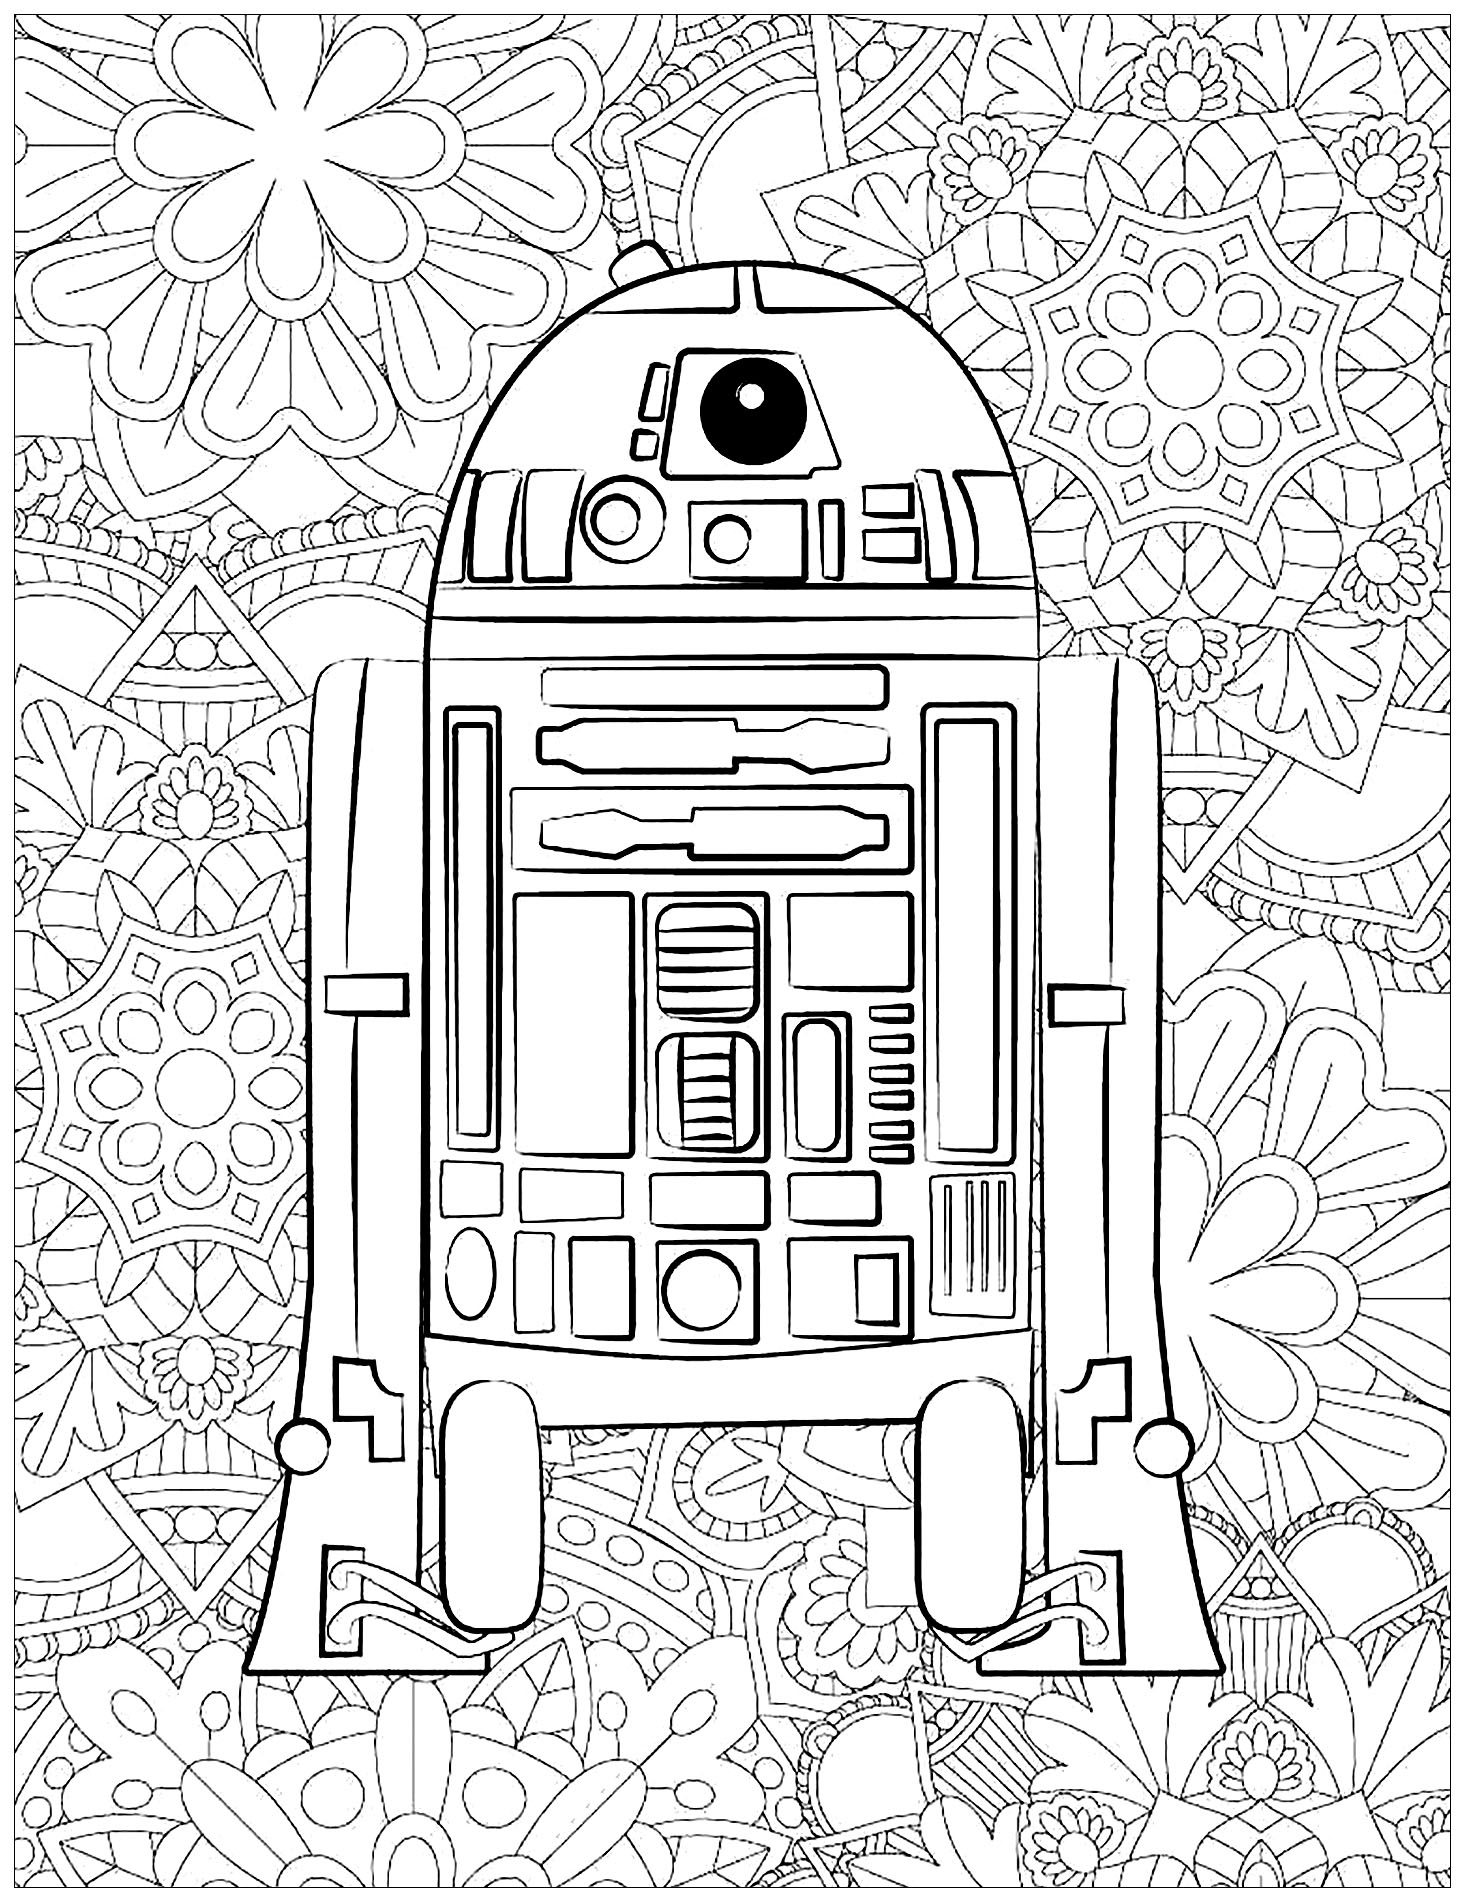 star-wars-r2d2-and-complex-background-star-wars-kids-coloring-pages